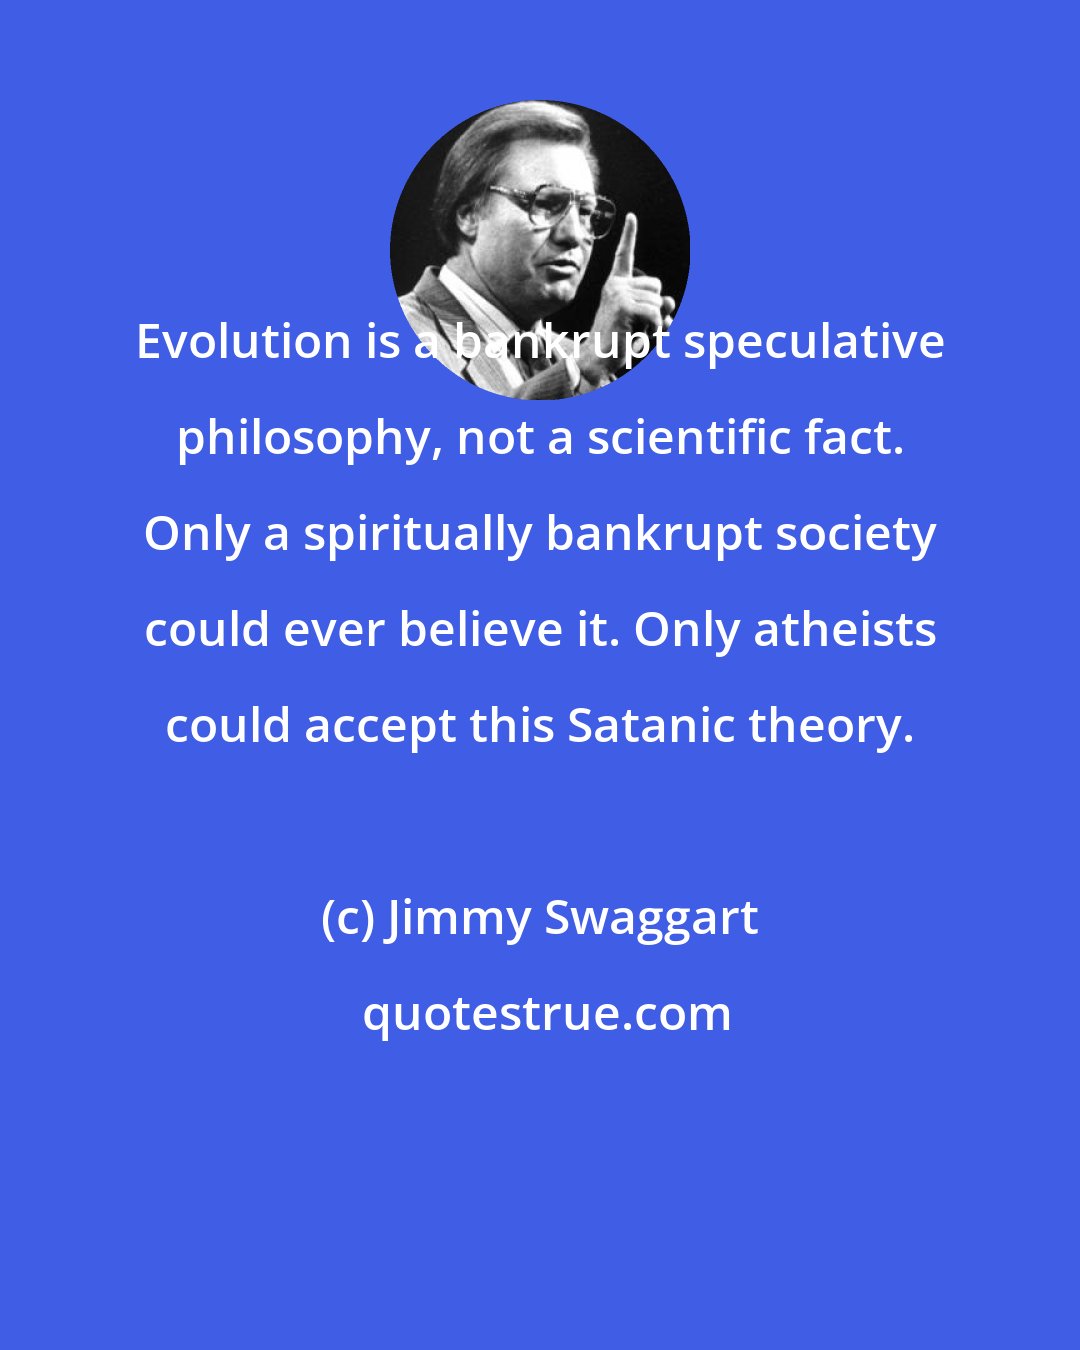 Jimmy Swaggart: Evolution is a bankrupt speculative philosophy, not a scientific fact. Only a spiritually bankrupt society could ever believe it. Only atheists could accept this Satanic theory.